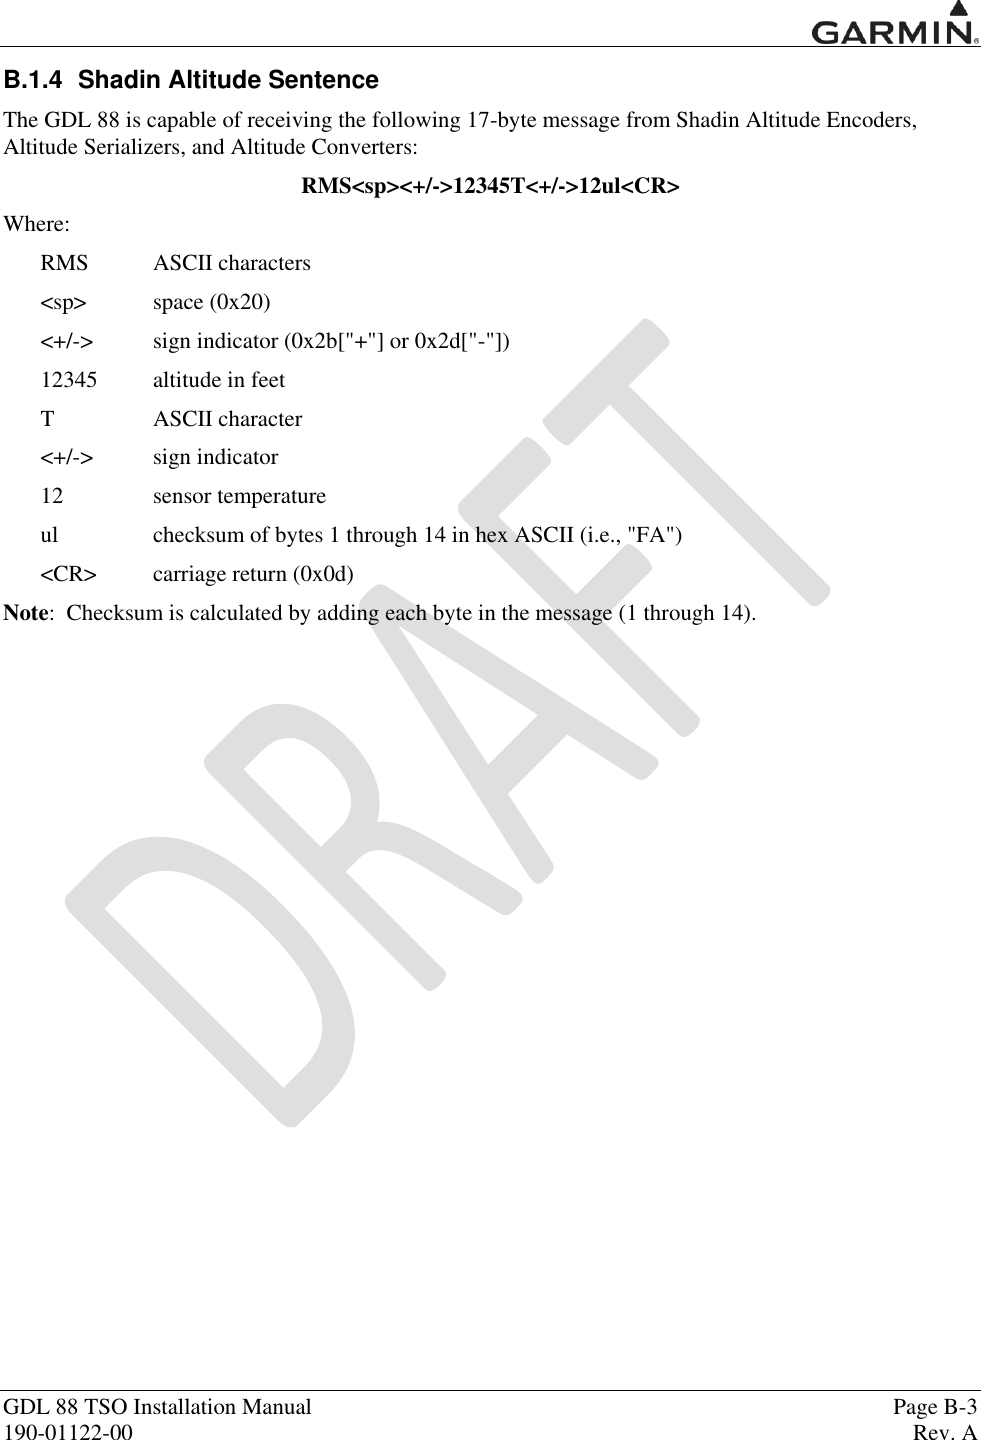  GDL 88 TSO Installation Manual    Page B-3 190-01122-00  Rev. A  B.1.4  Shadin Altitude Sentence The GDL 88 is capable of receiving the following 17-byte message from Shadin Altitude Encoders, Altitude Serializers, and Altitude Converters: RMS&lt;sp&gt;&lt;+/-&gt;12345T&lt;+/-&gt;12ul&lt;CR&gt; Where: RMS  ASCII characters &lt;sp&gt;  space (0x20) &lt;+/-&gt;  sign indicator (0x2b[&quot;+&quot;] or 0x2d[&quot;-&quot;]) 12345  altitude in feet T  ASCII character &lt;+/-&gt;  sign indicator 12  sensor temperature ul  checksum of bytes 1 through 14 in hex ASCII (i.e., &quot;FA&quot;) &lt;CR&gt;  carriage return (0x0d) Note:  Checksum is calculated by adding each byte in the message (1 through 14). 